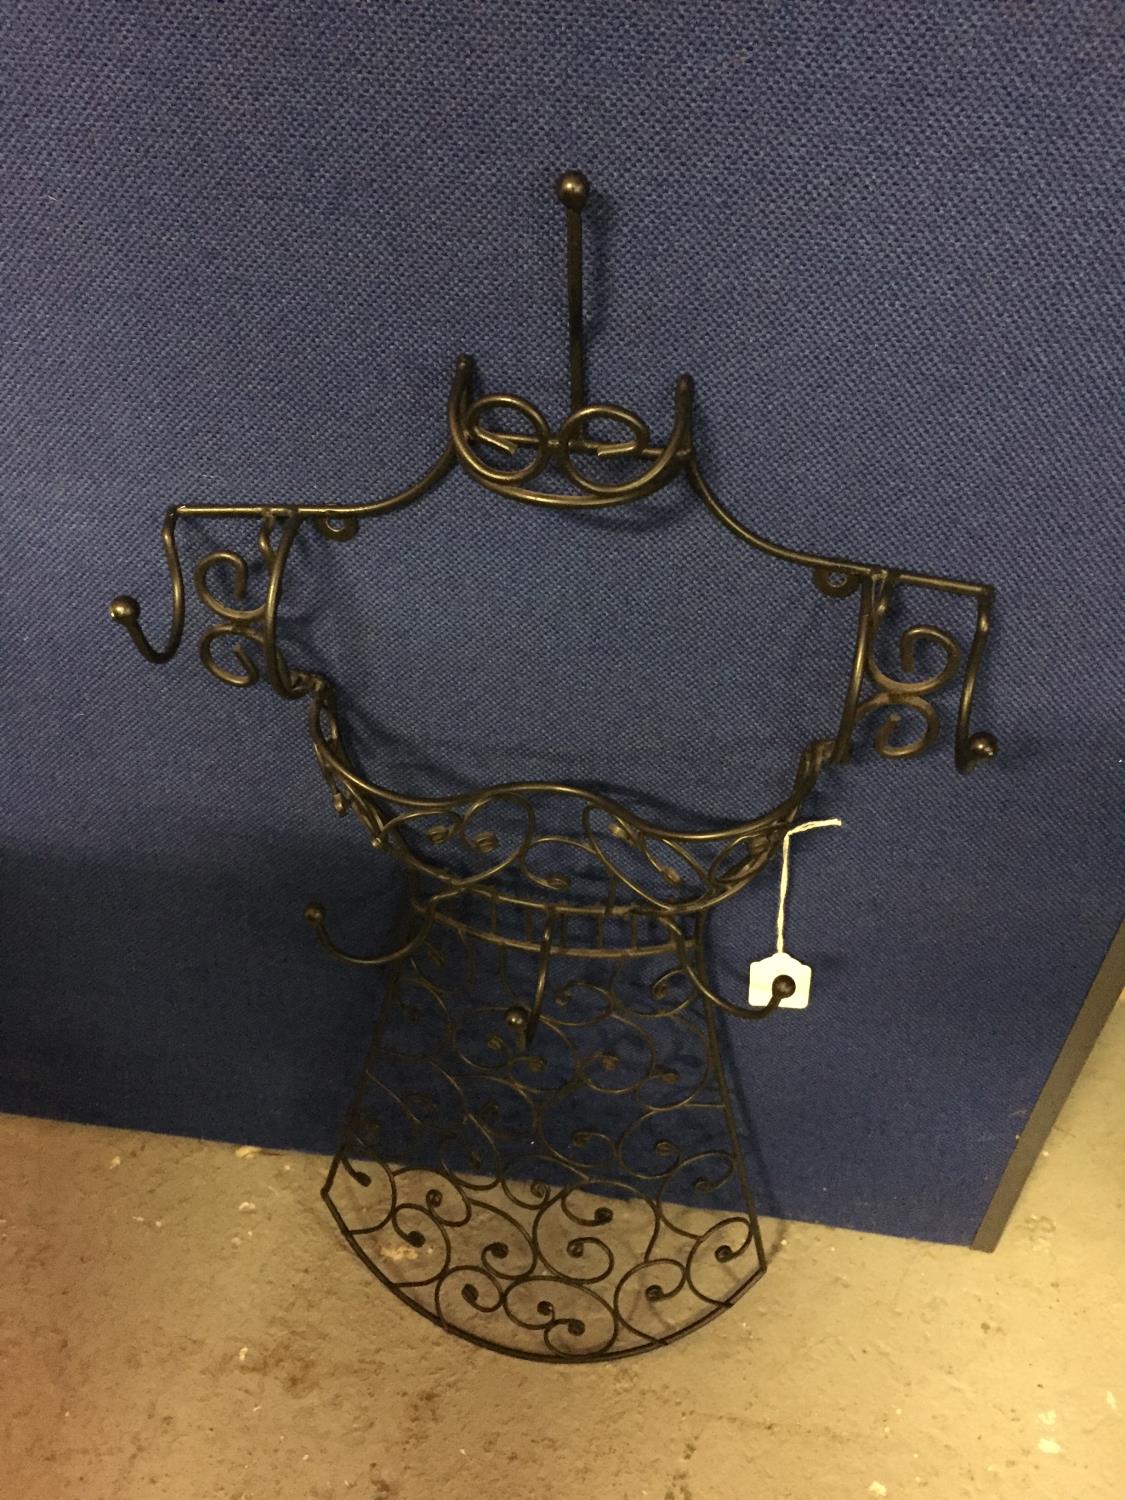 A WALL MOUNTED DRESS SHAPED ACCESSORIES HOOK - Image 2 of 4